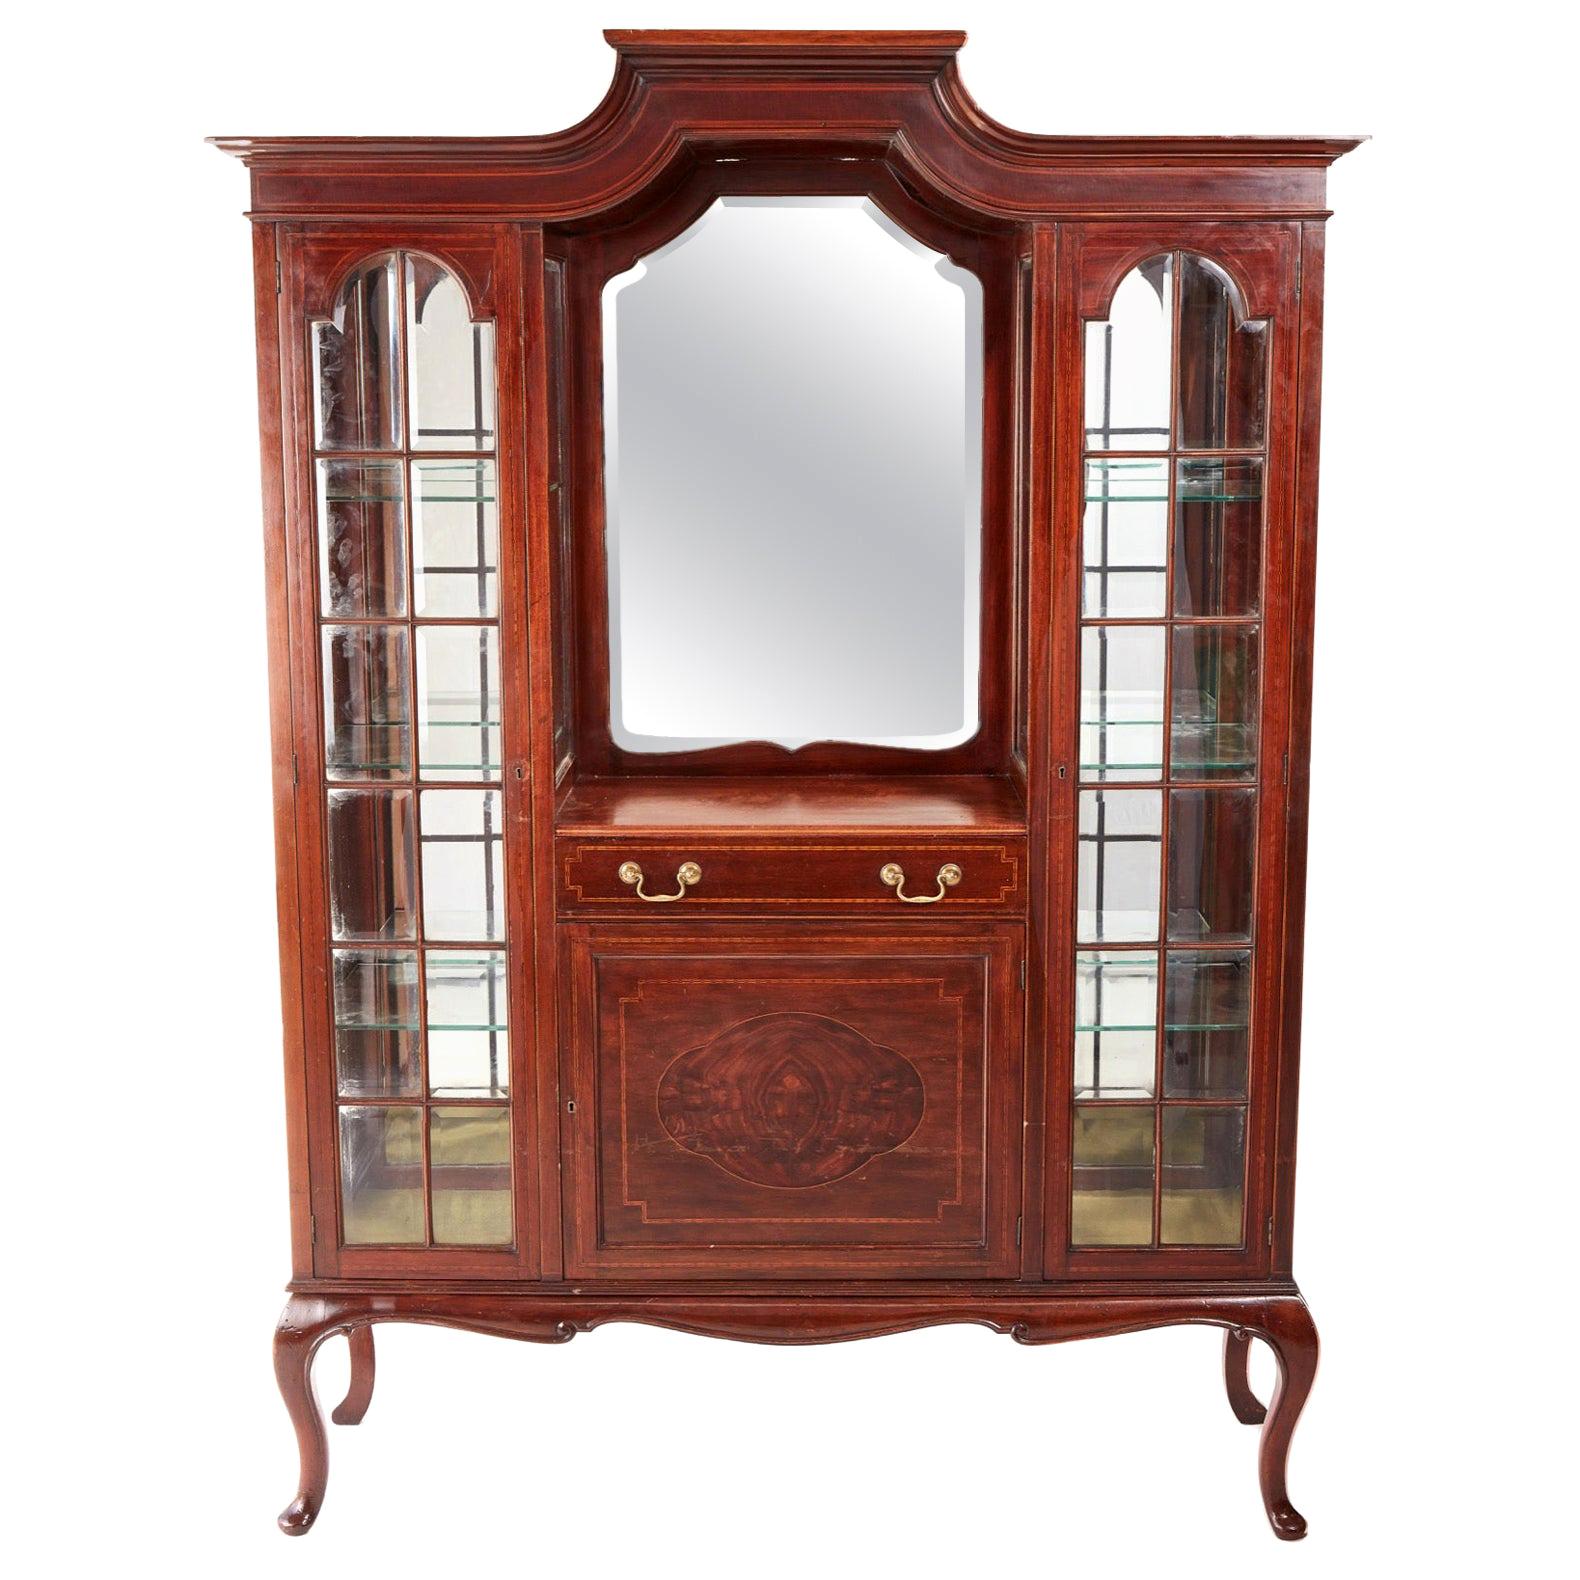 Edwardian Inlaid Mahogany Display Cabinet by Maple & Co.